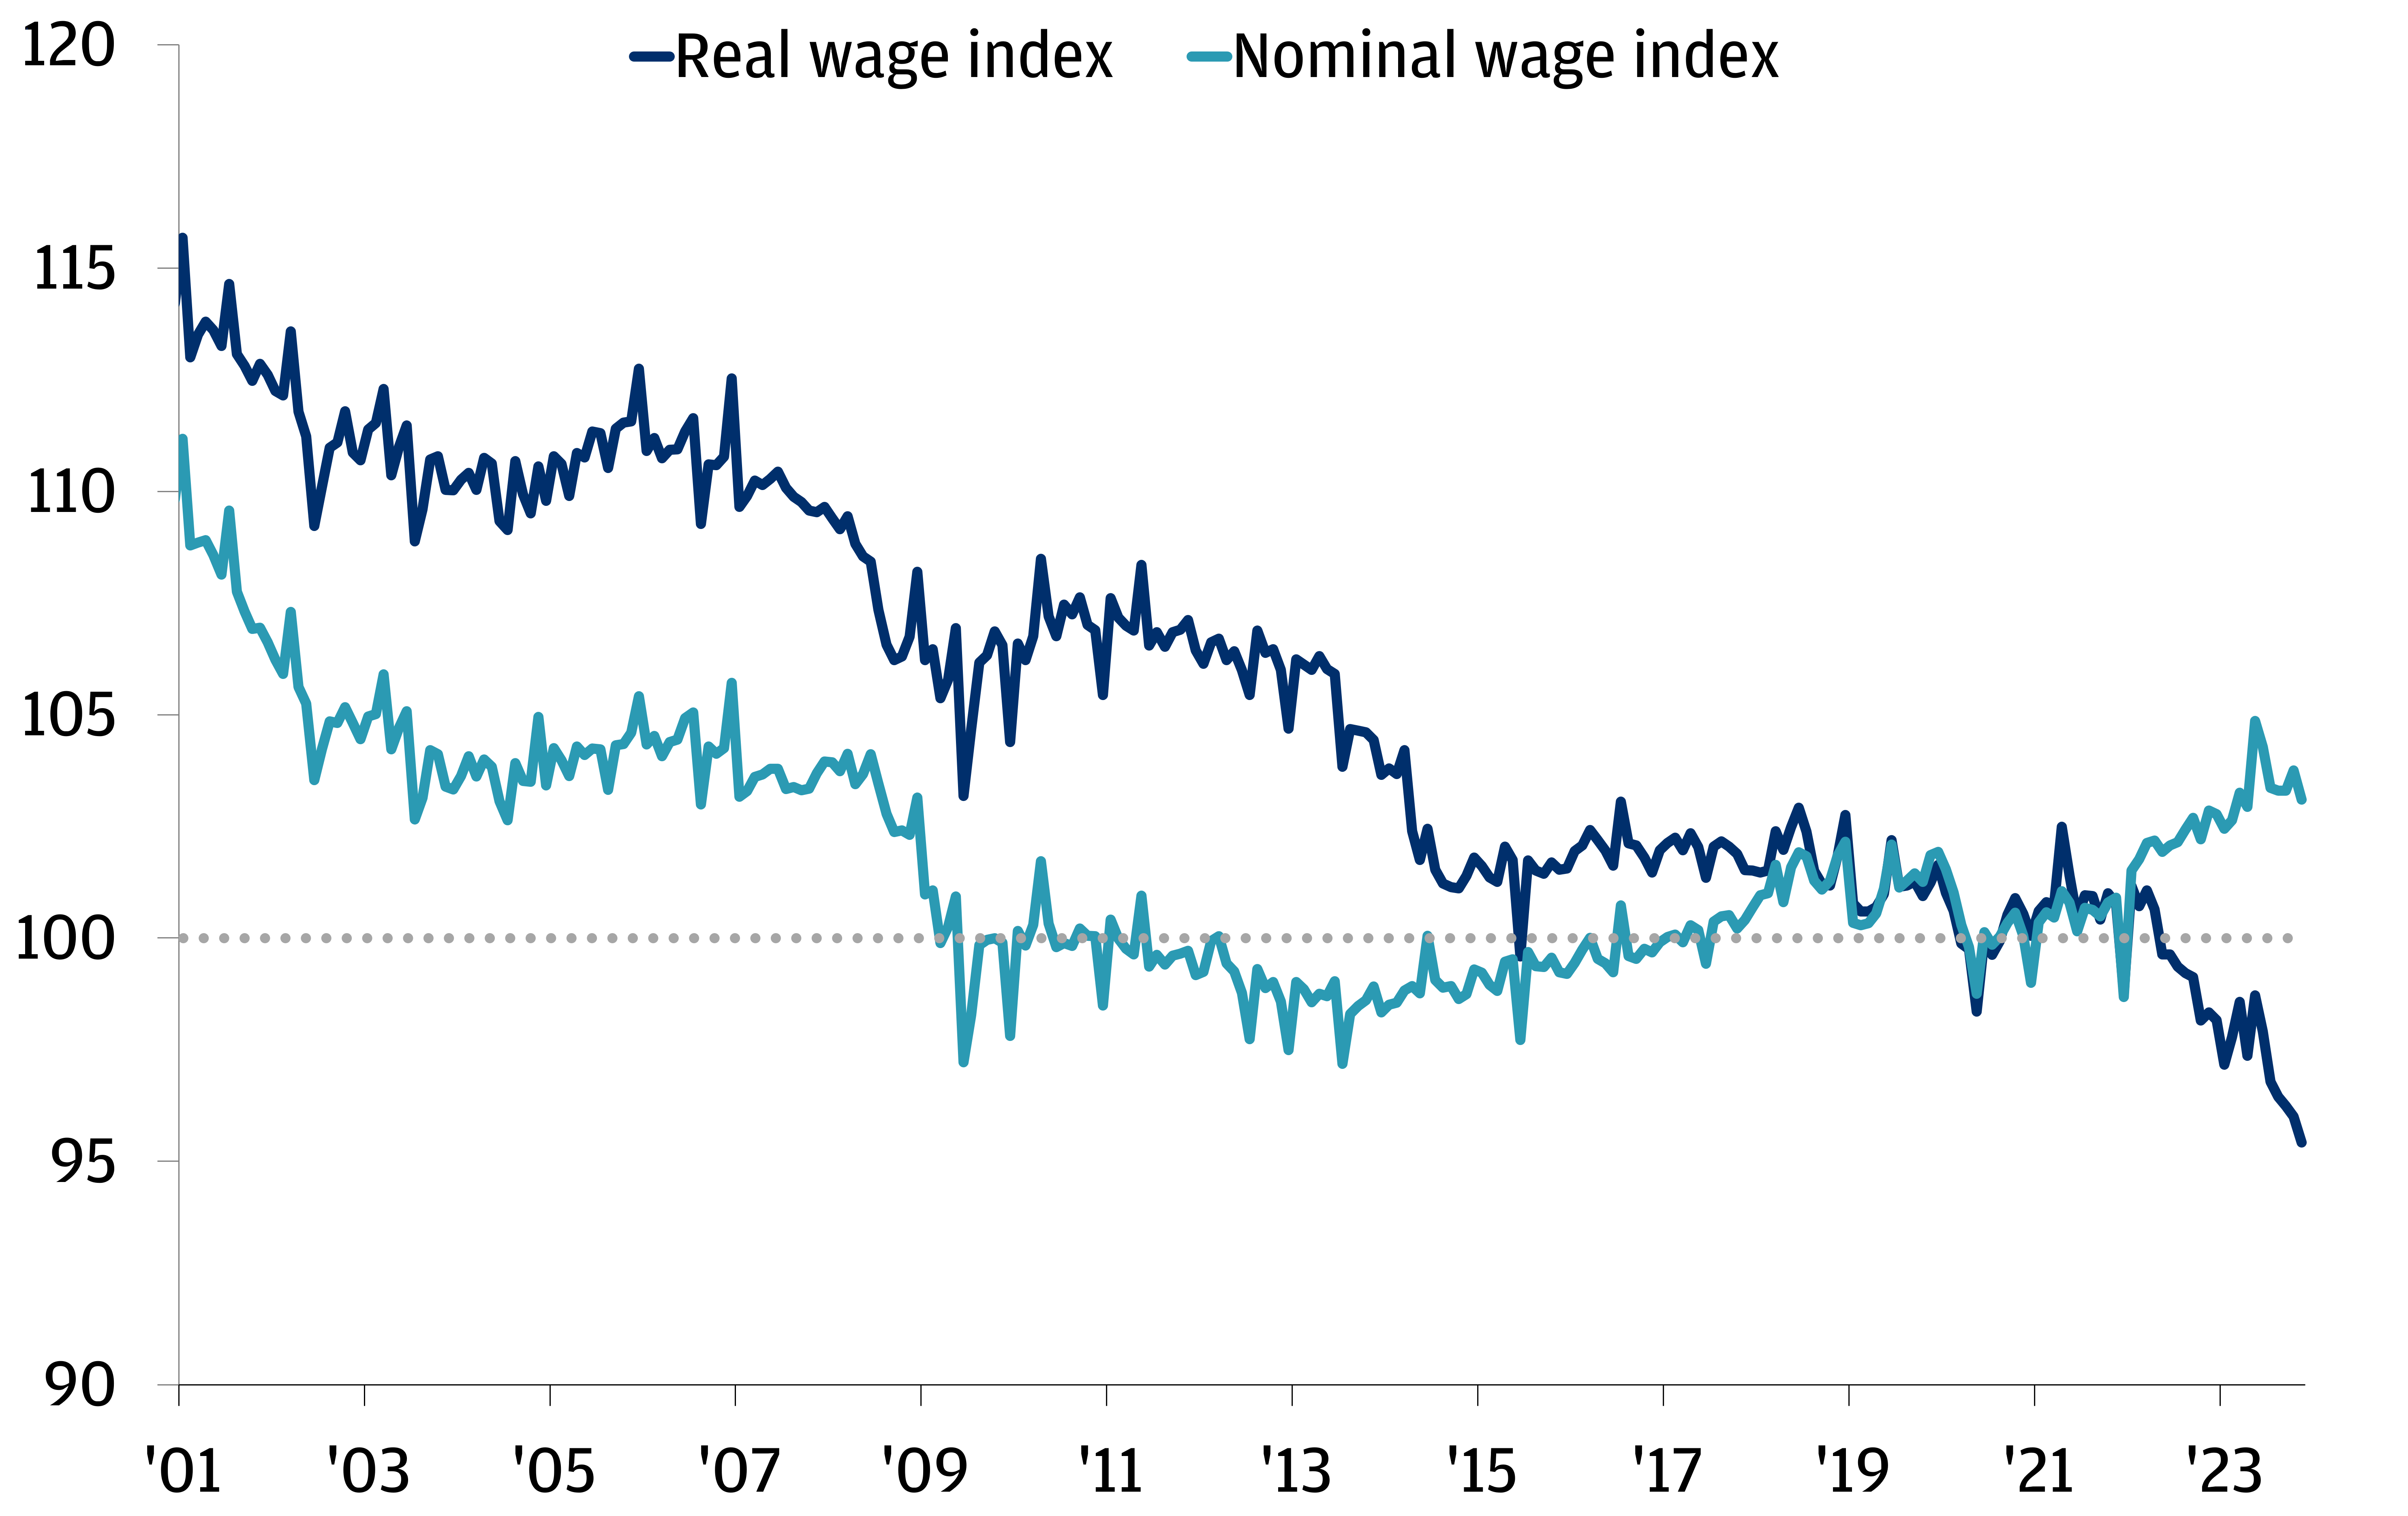 Divergence between Japan’s nominal and real wage, with the latter in negative territory 